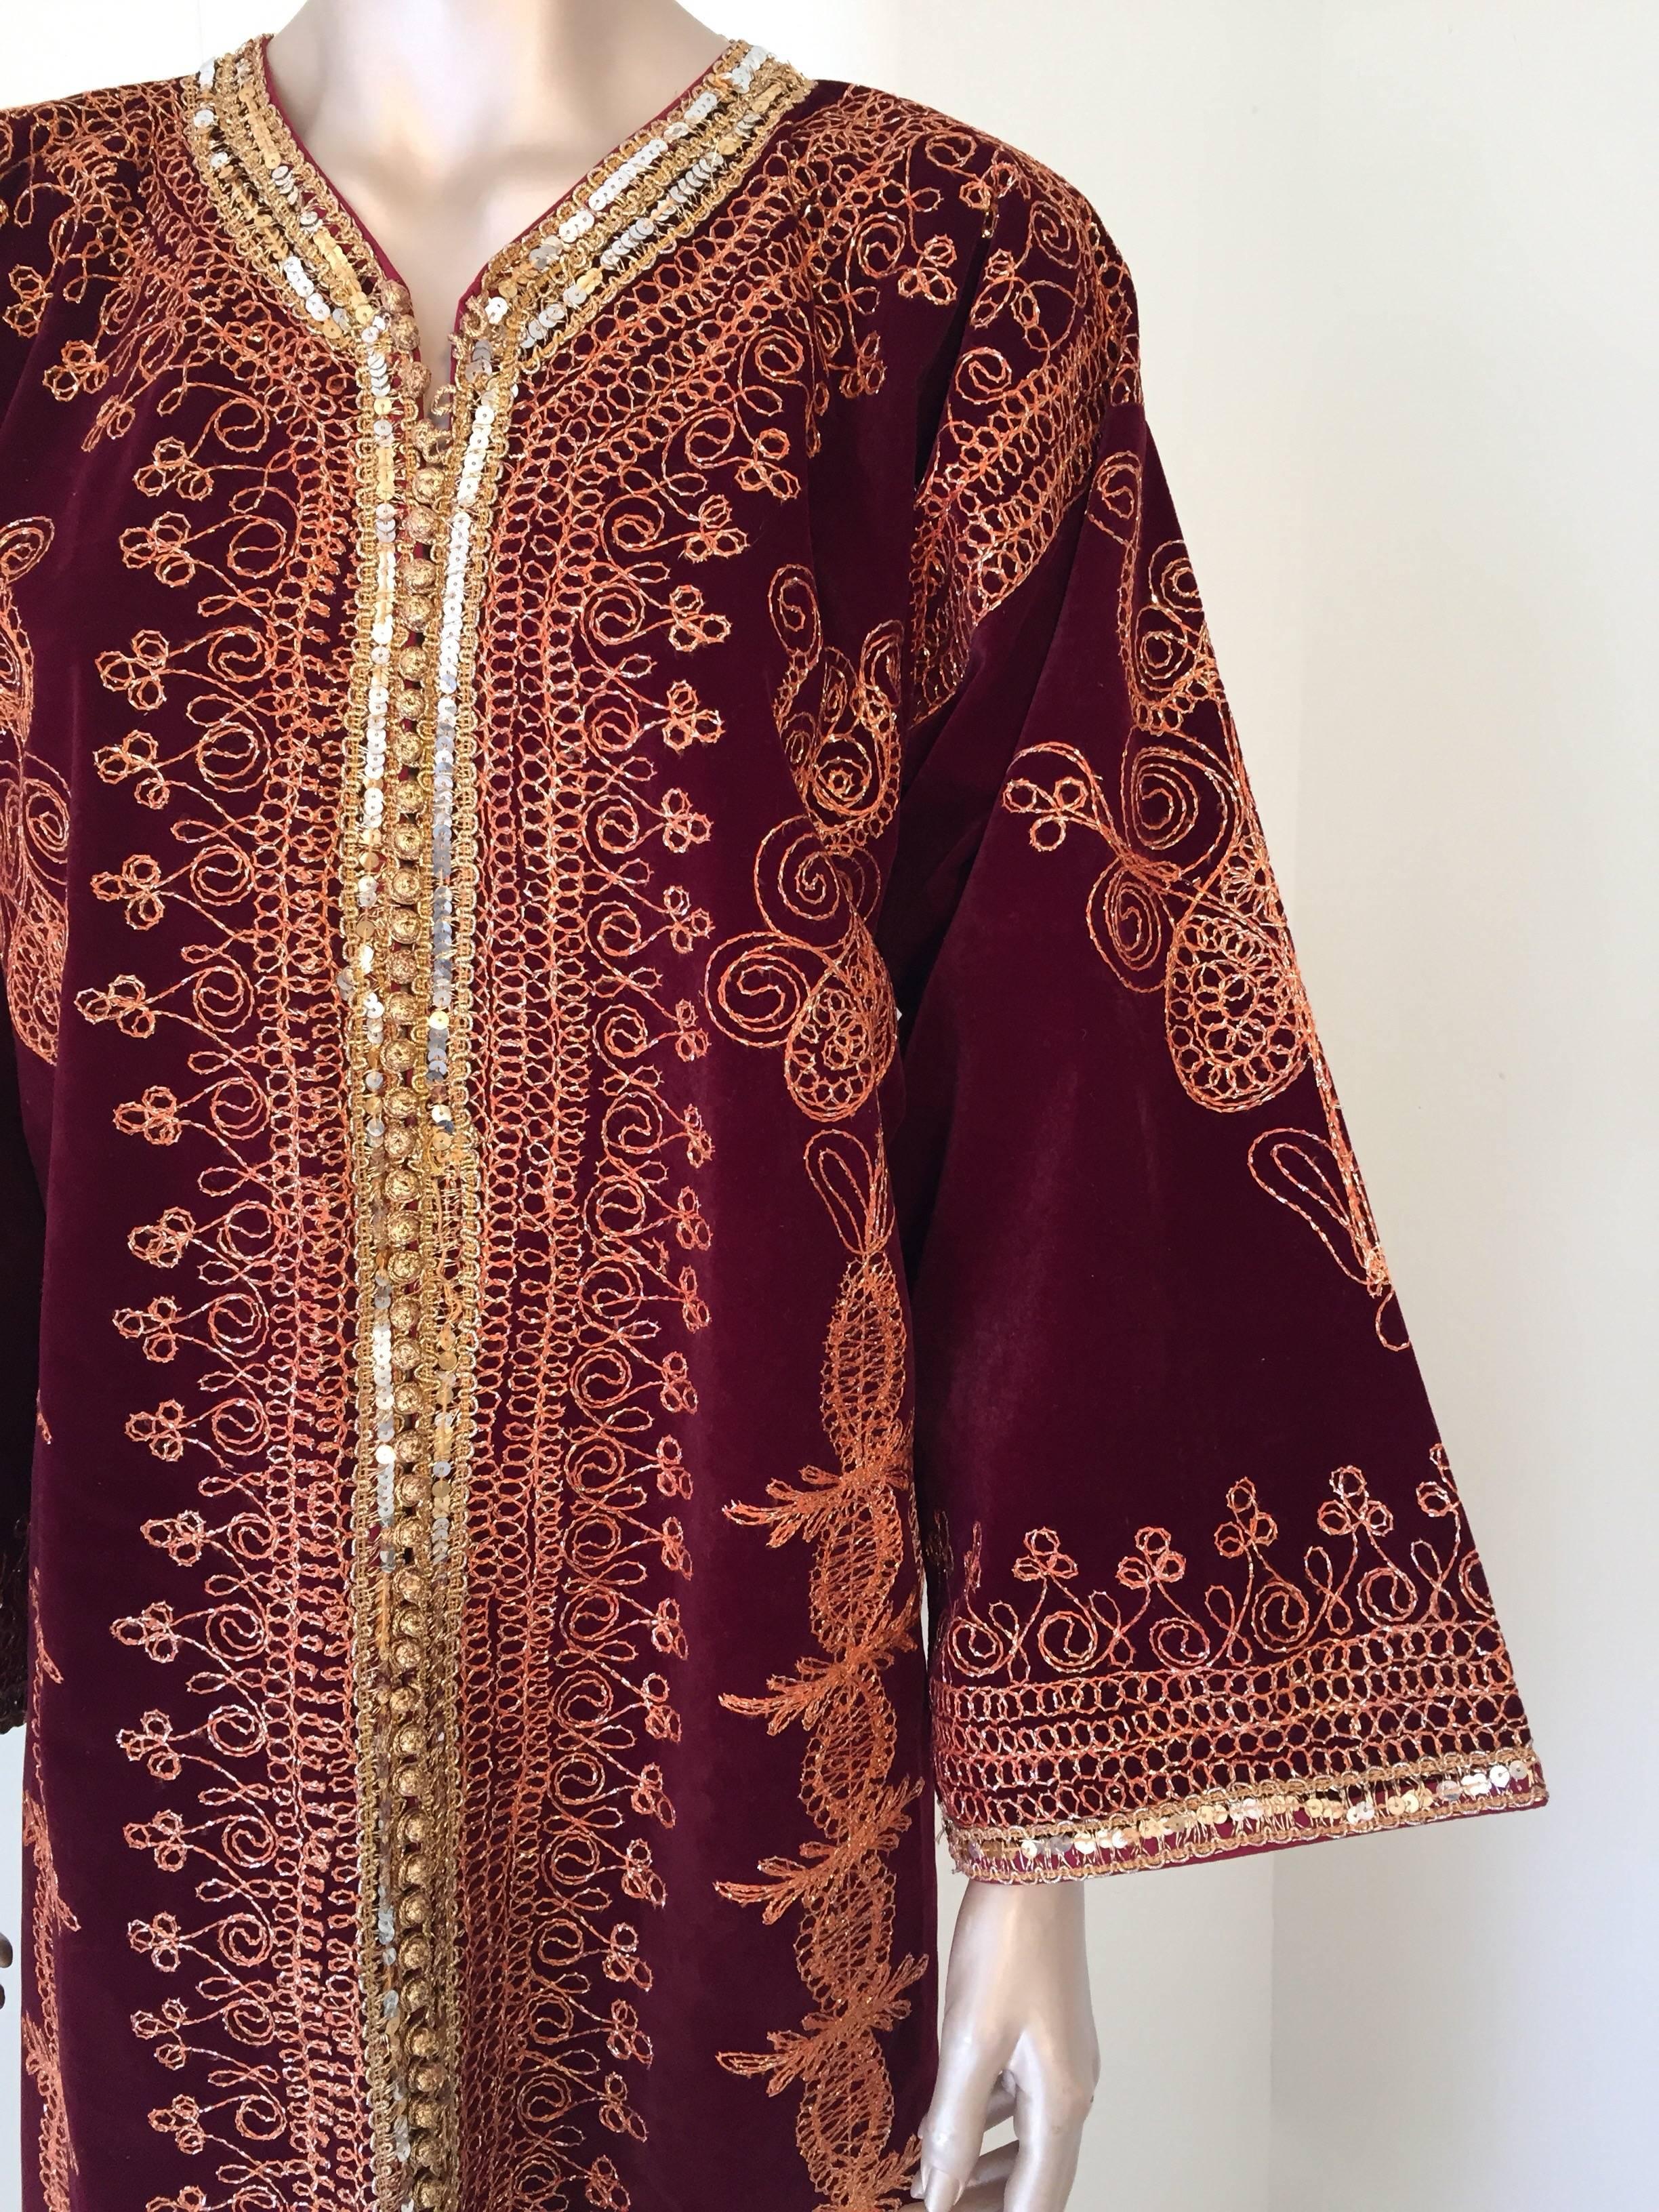 20th Century Moroccan Caftan Maroon Velvet Embroidered with Gold Kaftan, circa 1970